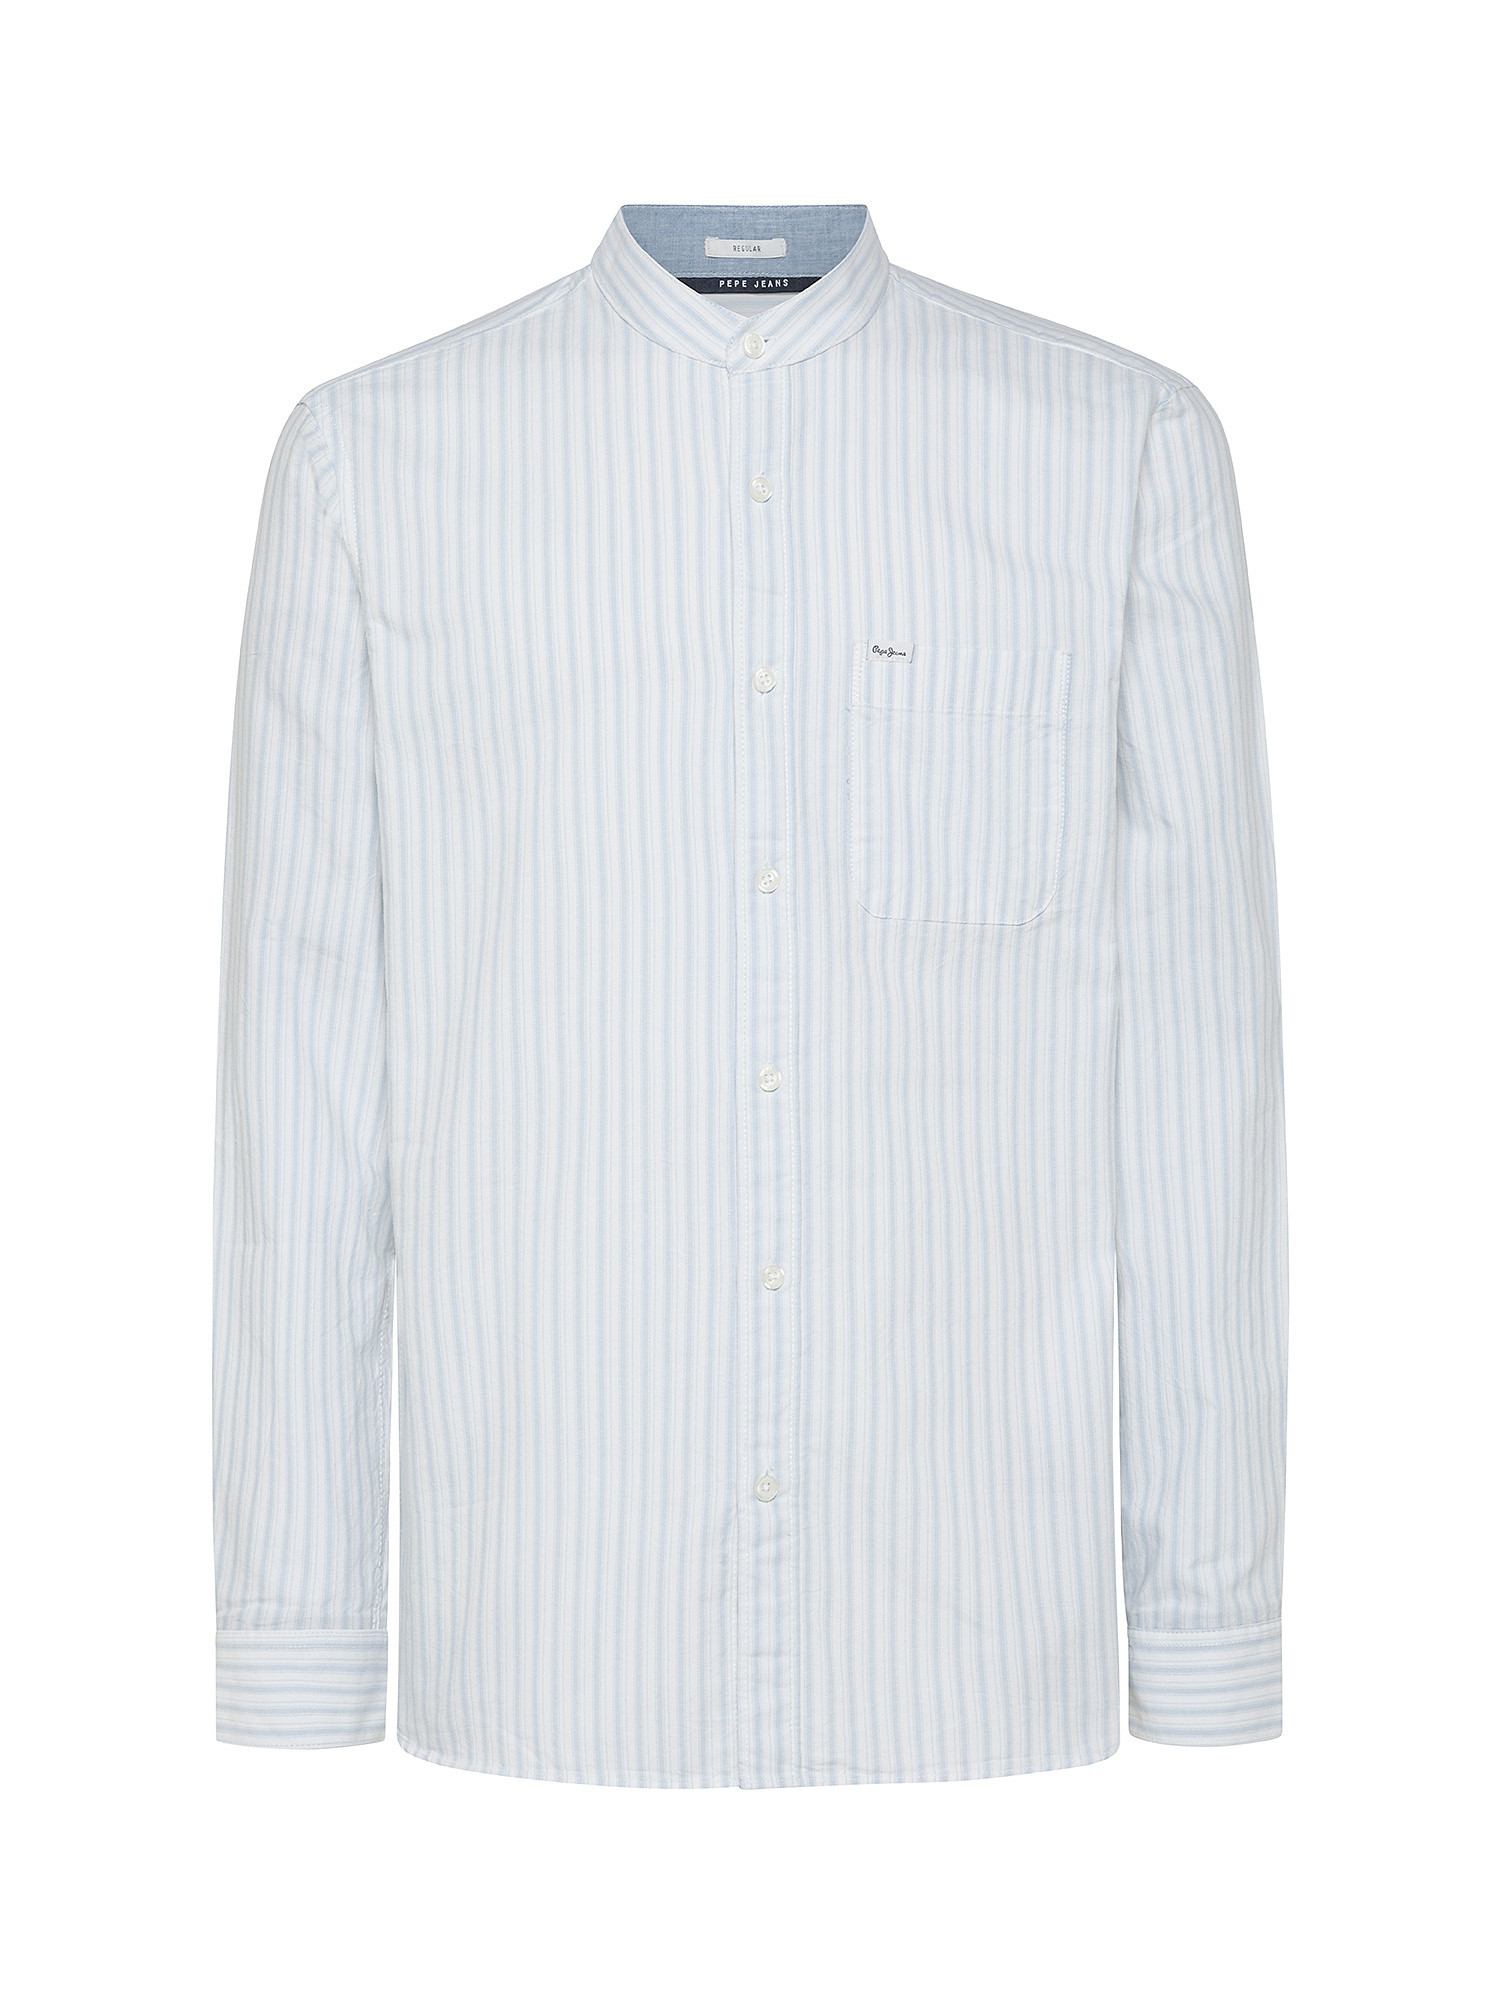 Pepe Jeans - Camicia a righe regular fit, Bianco, large image number 1